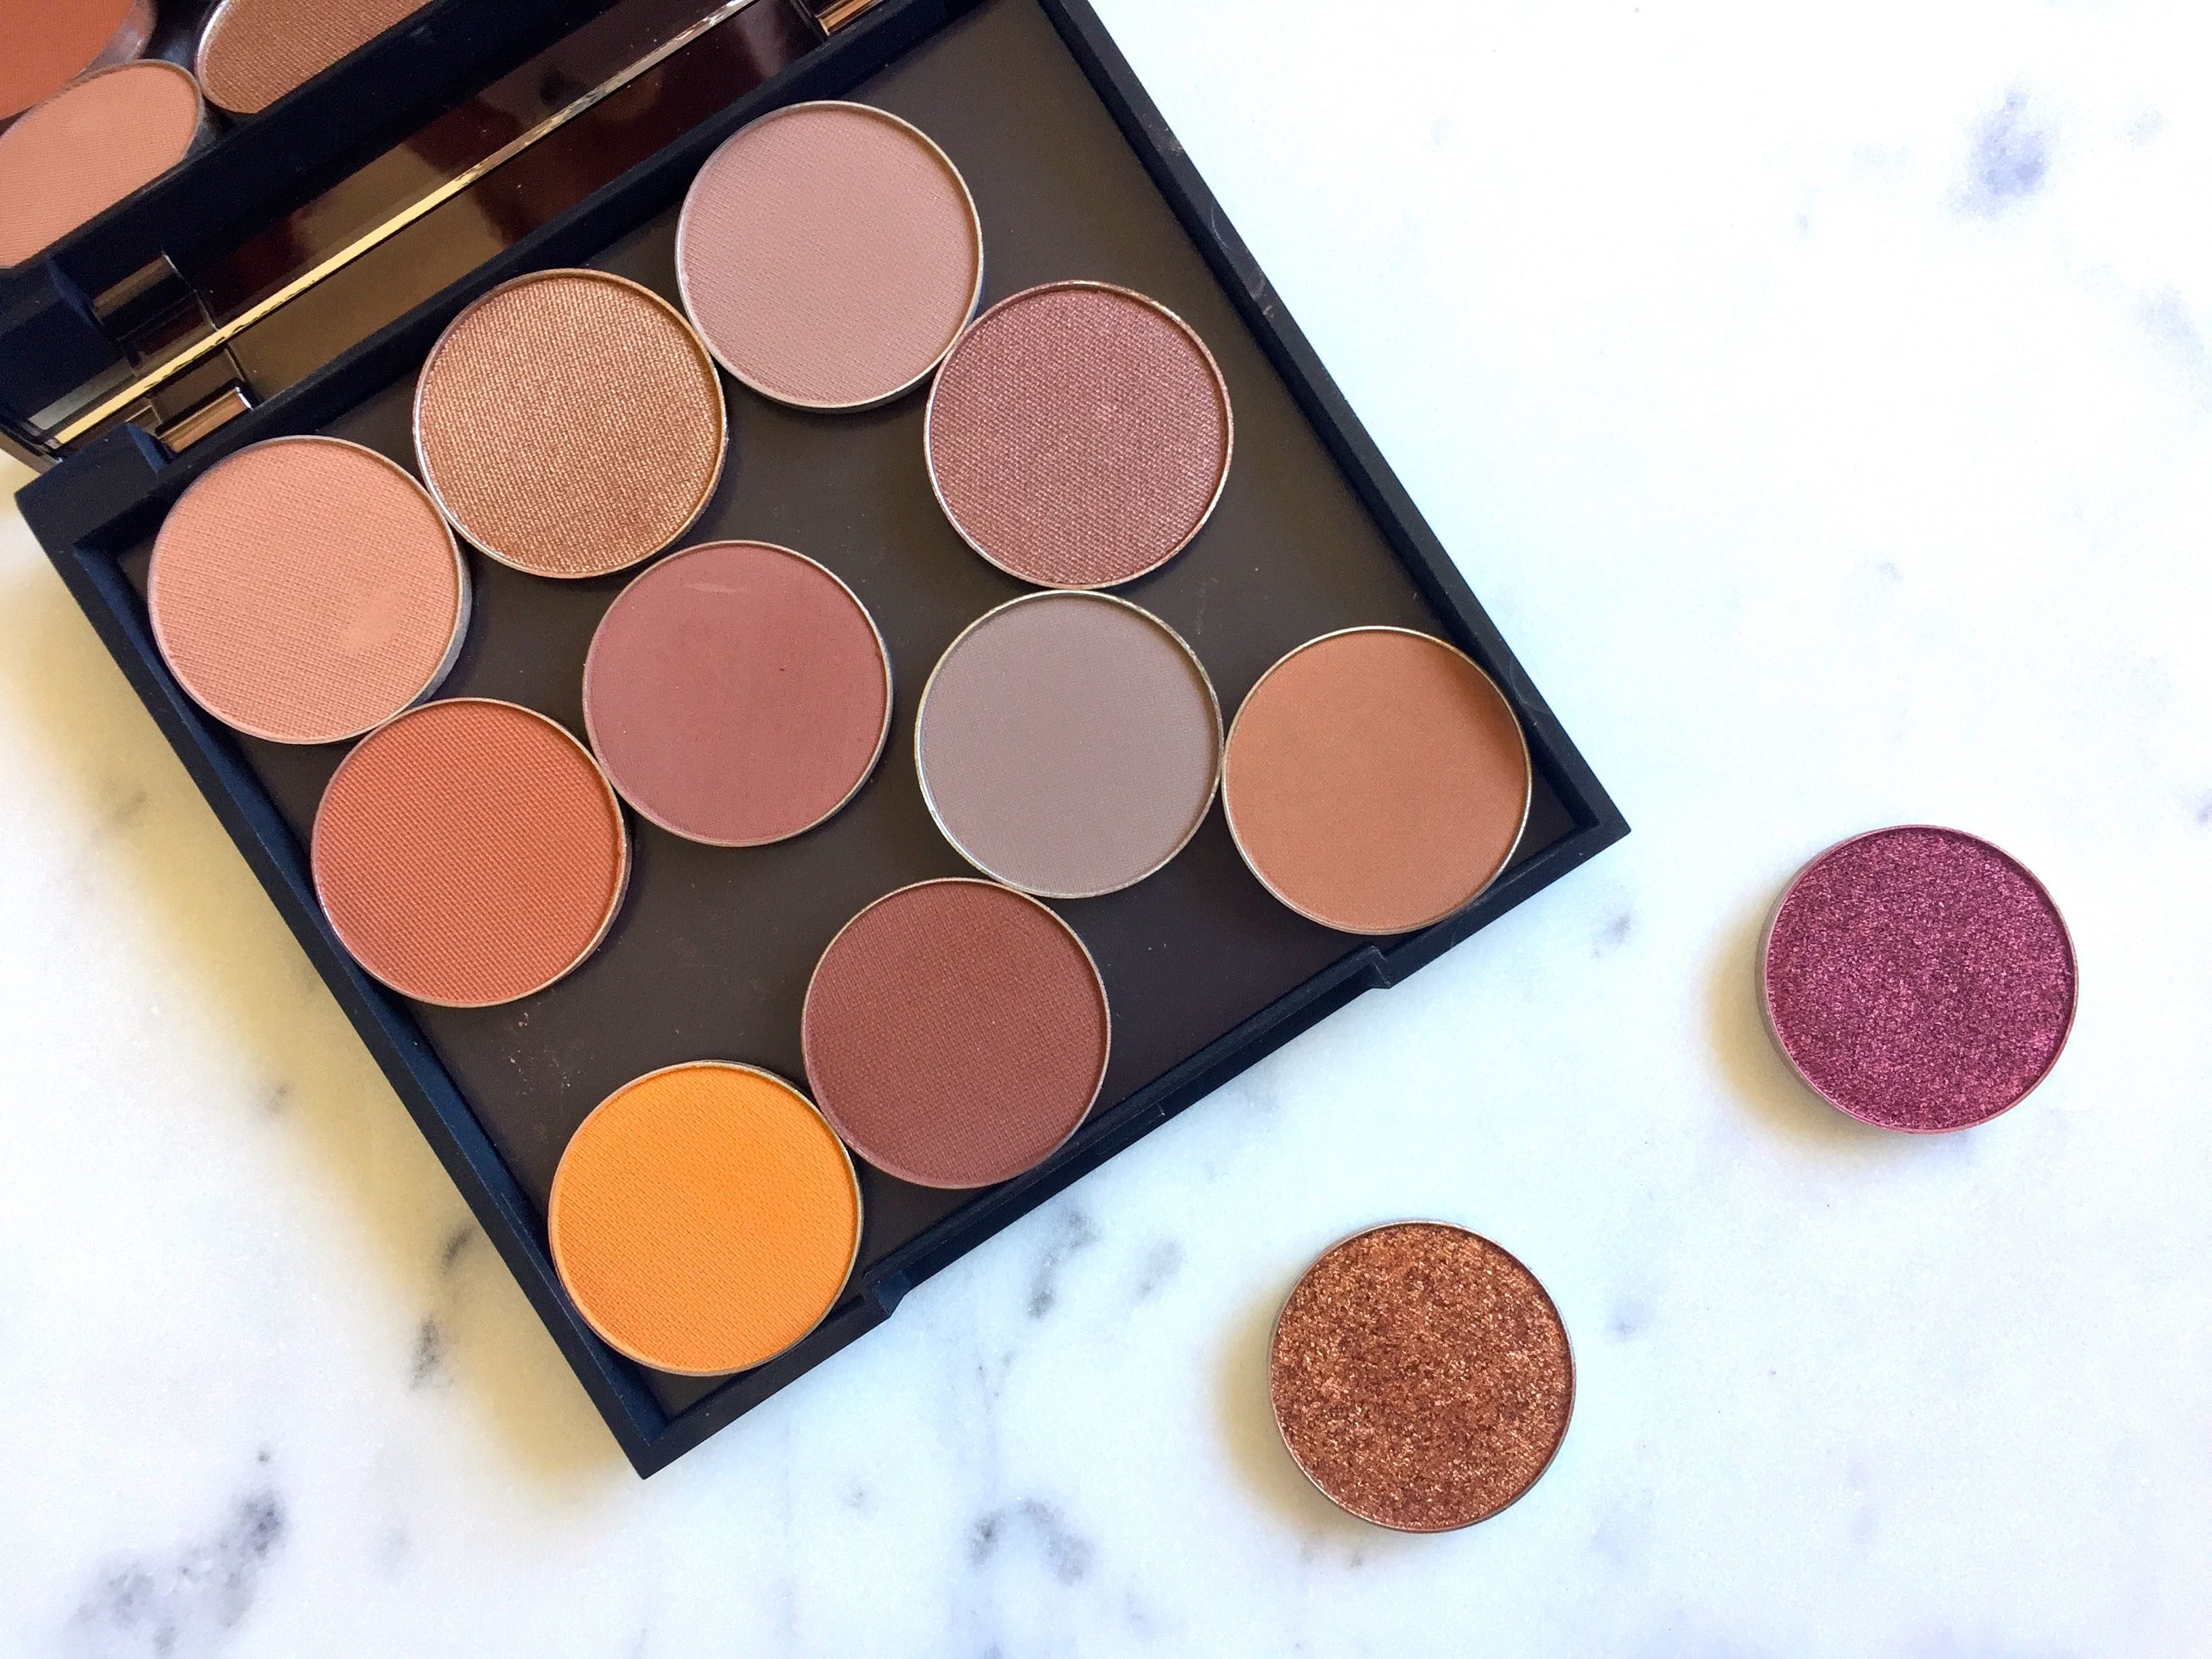 NEW Makeup Geek Fall 2016 Eyeshadows - Review & Swatches by Facemadeup.com